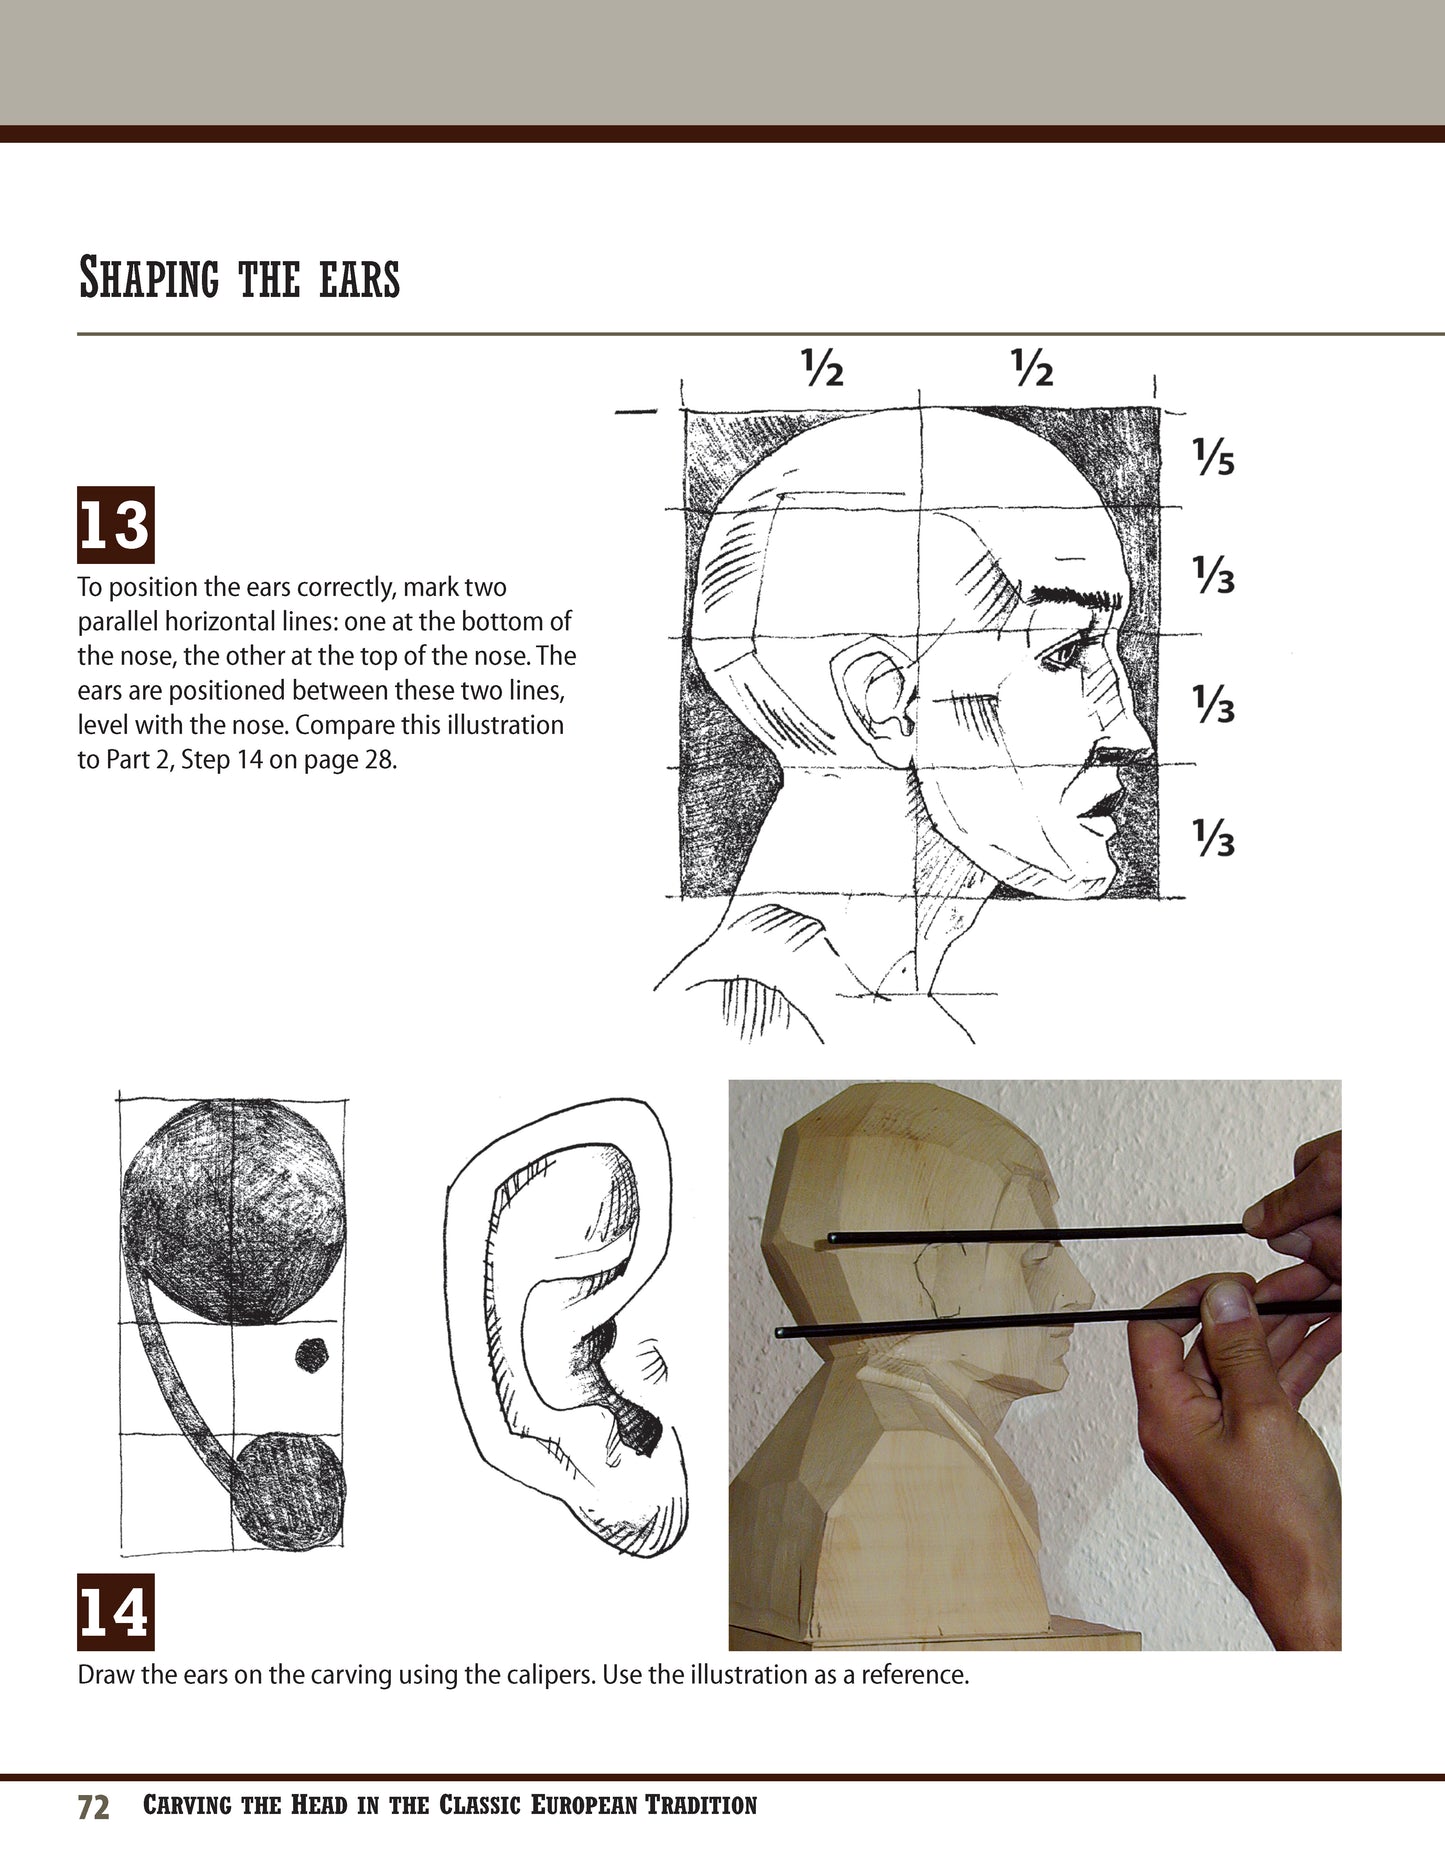 Carving the Head in the Classic European Tradition, Revised Edition